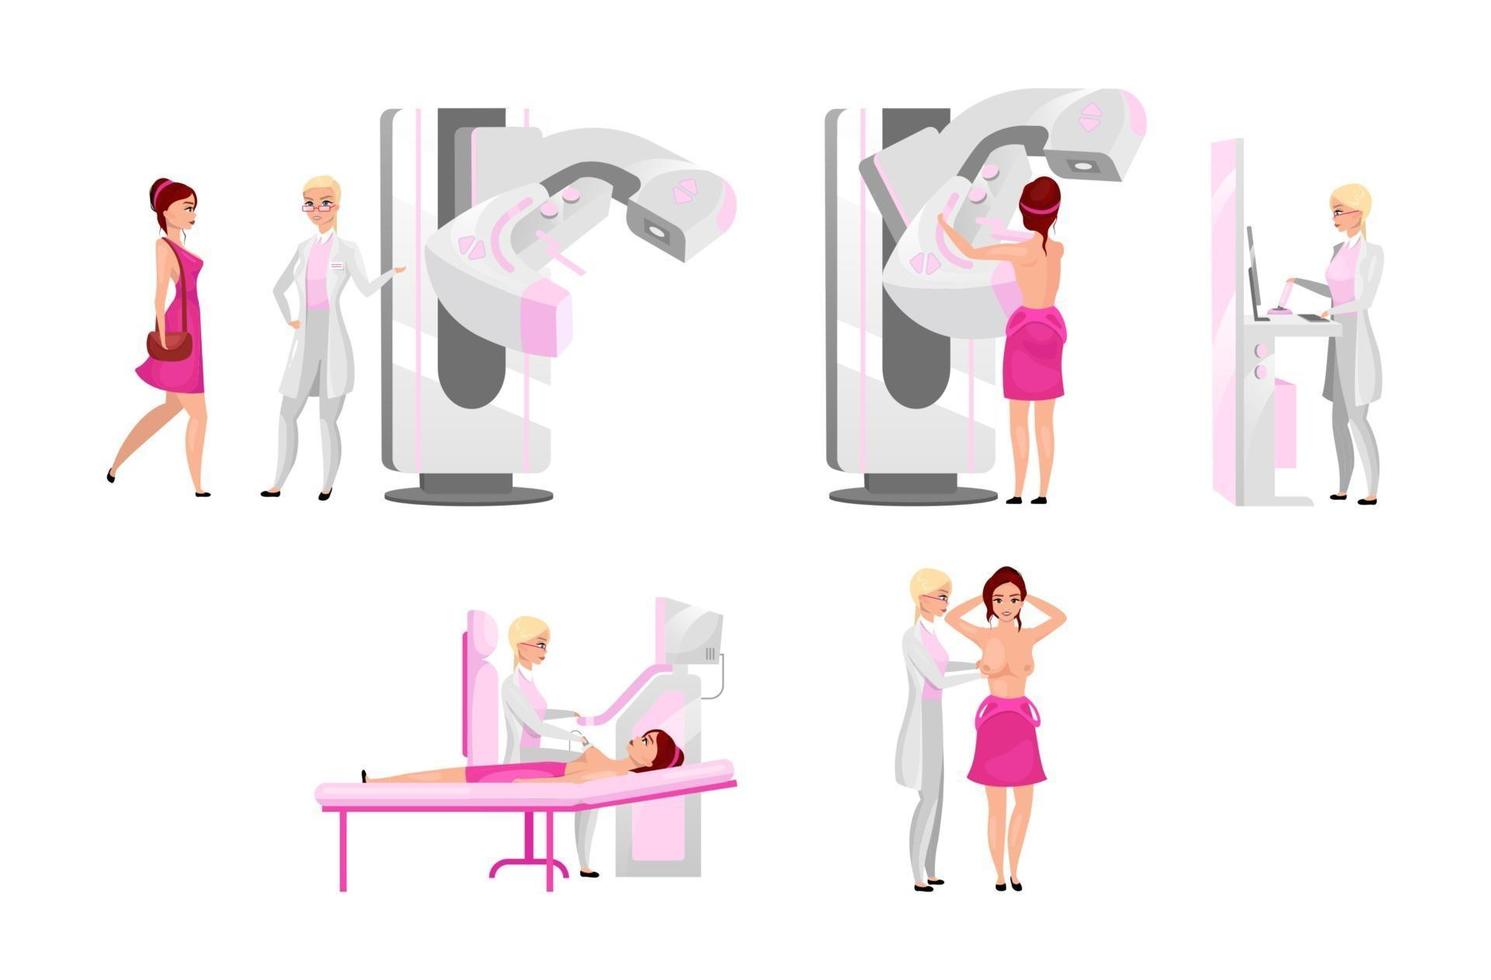 Breast medical examination flat illustrations set. Mammography, diagnostic medical sonography and palpation. Breast cancer prevention exam concept. Mammalogist and female patient cartoon character vector